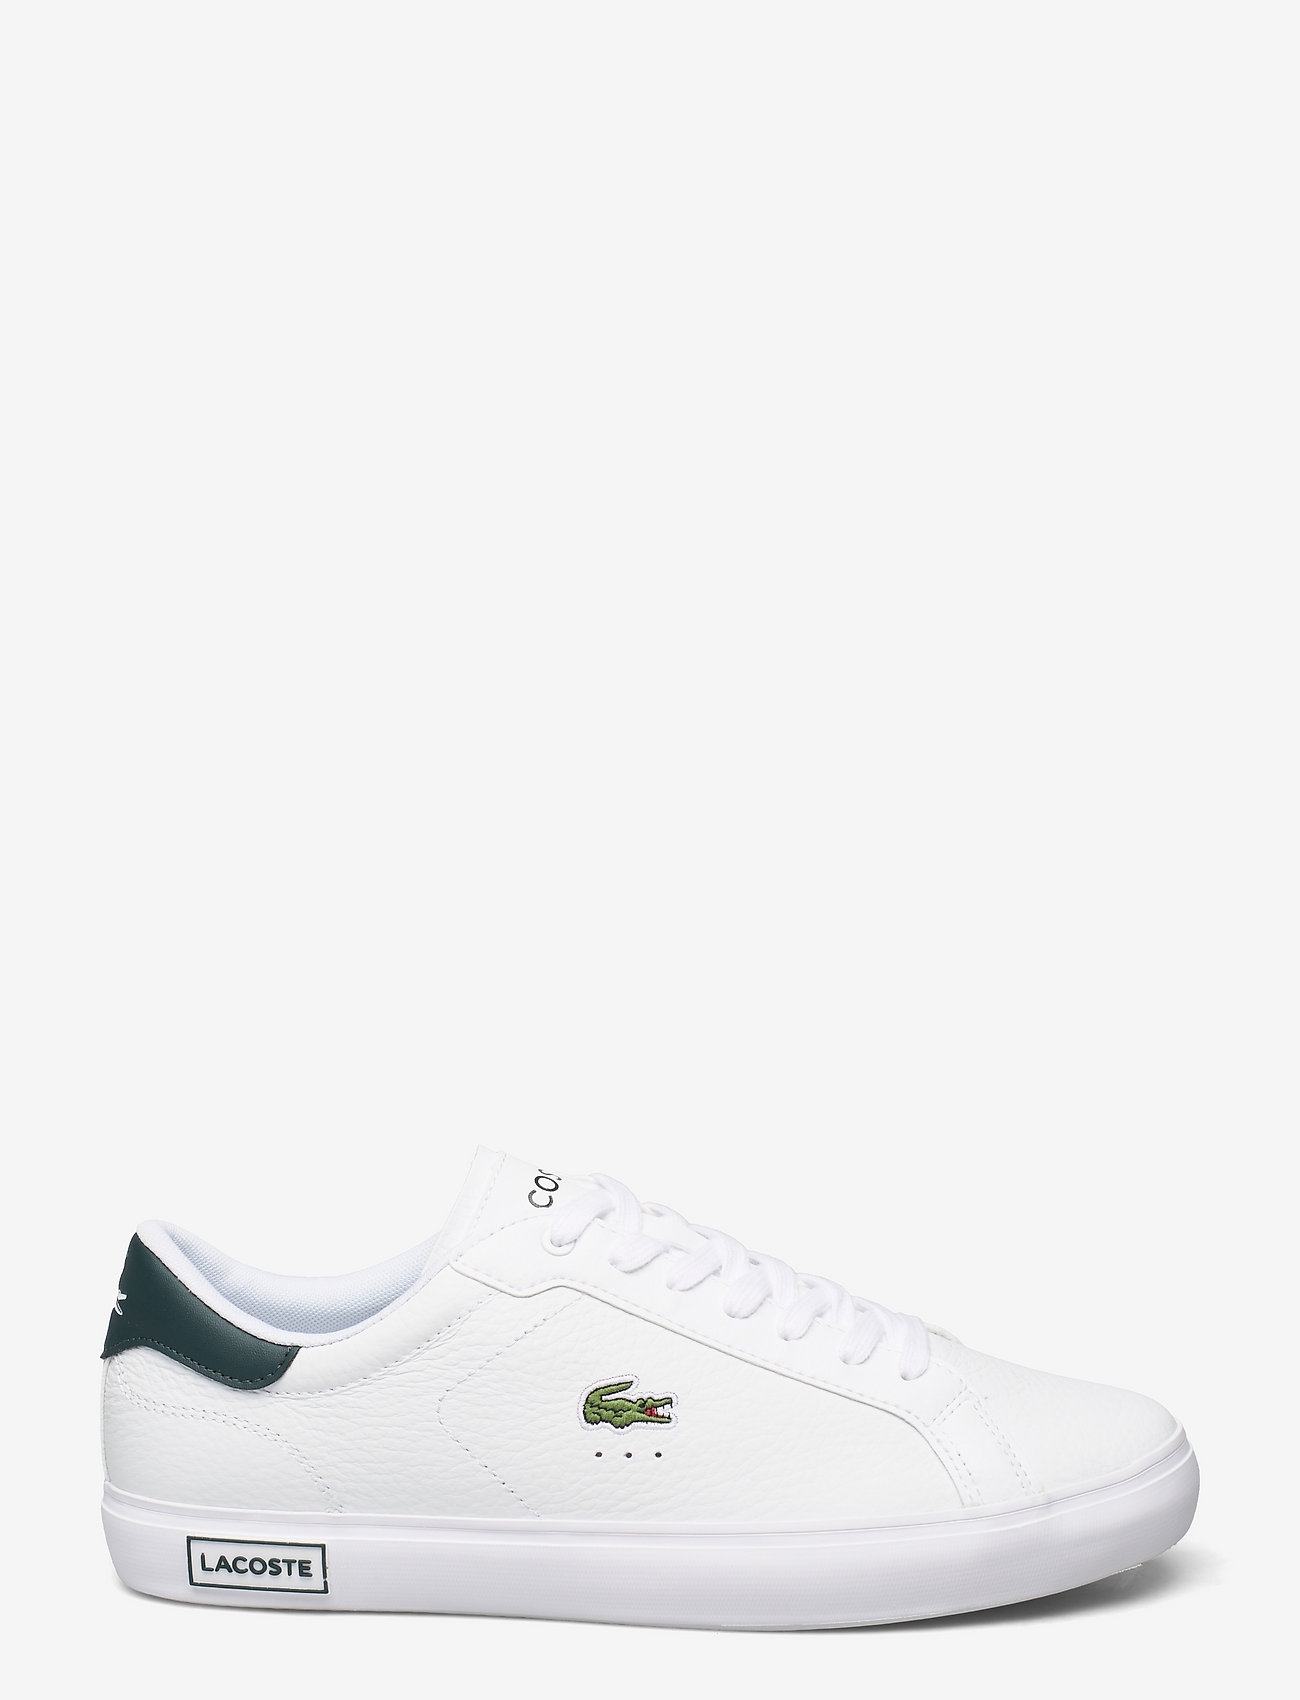 kommentator Mob forfremmelse Lacoste Shoes Powercourt 07212sma - Low Tops | Boozt.com